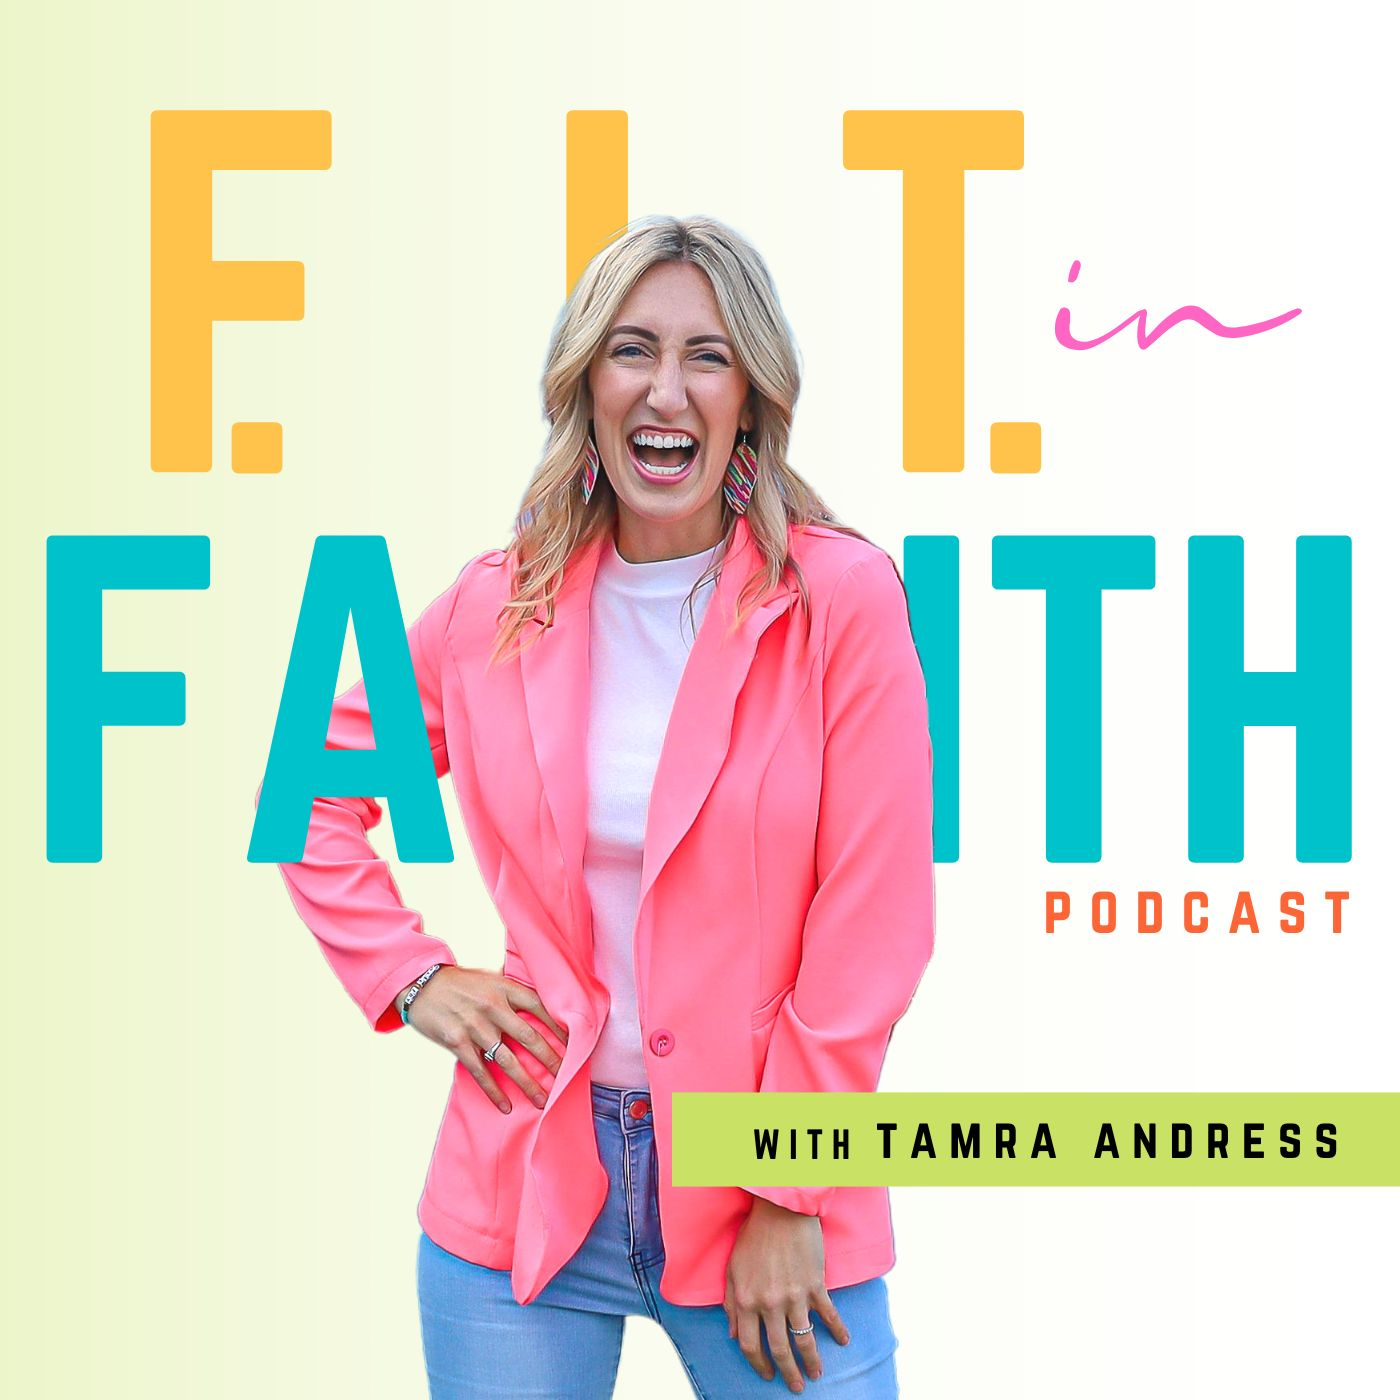 Ep 419: Using Words of Encouragement to Empower Others | Tamra Andress & Bruce Pulver